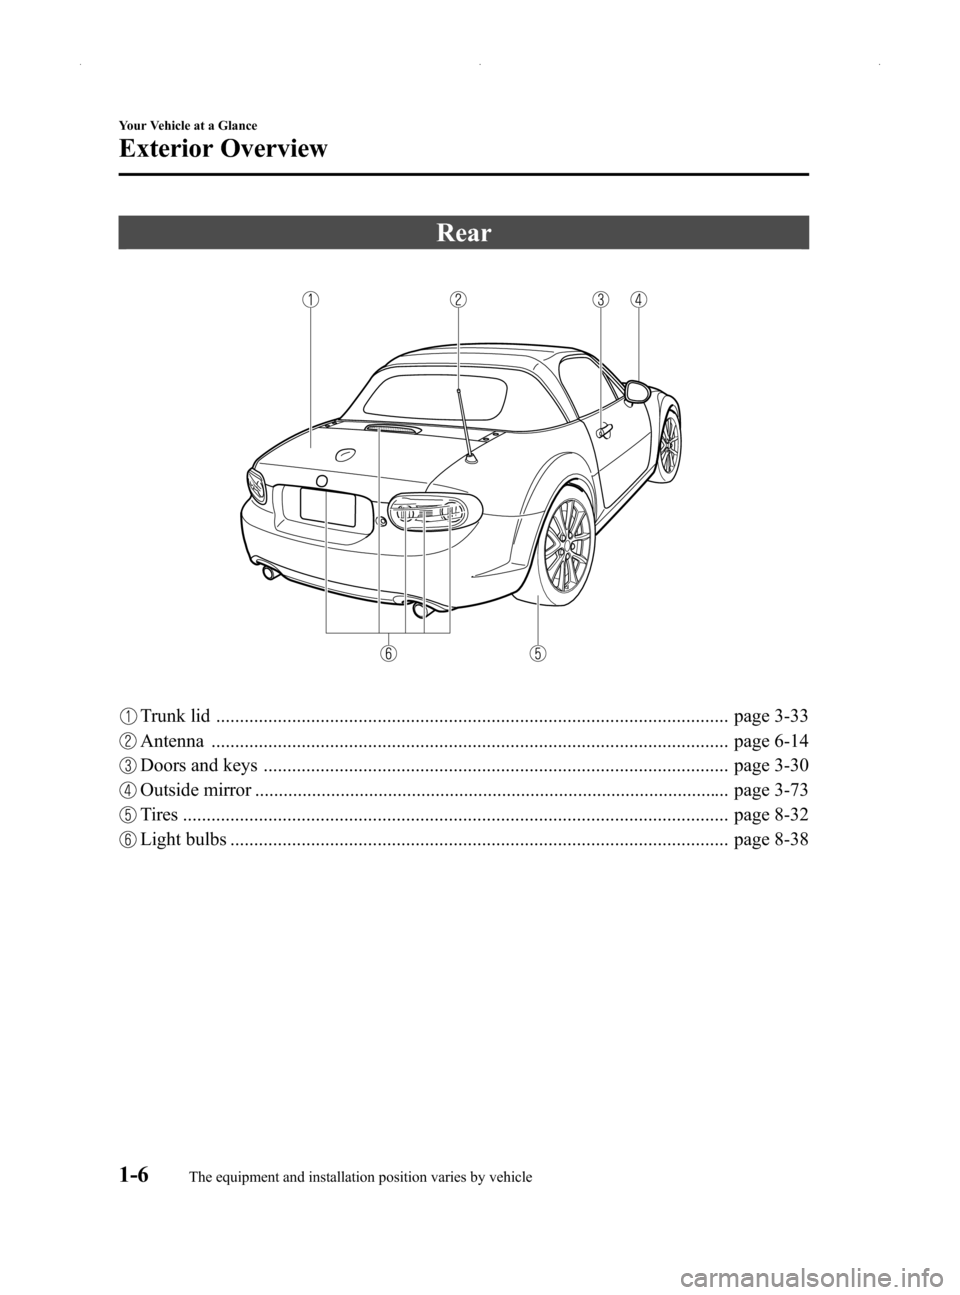 MAZDA MODEL MX-5 2014  Owners Manual (in English) Black plate (12,1)
Rear
Trunk lid ............................................................................................................ page 3-33
Antenna .......................................